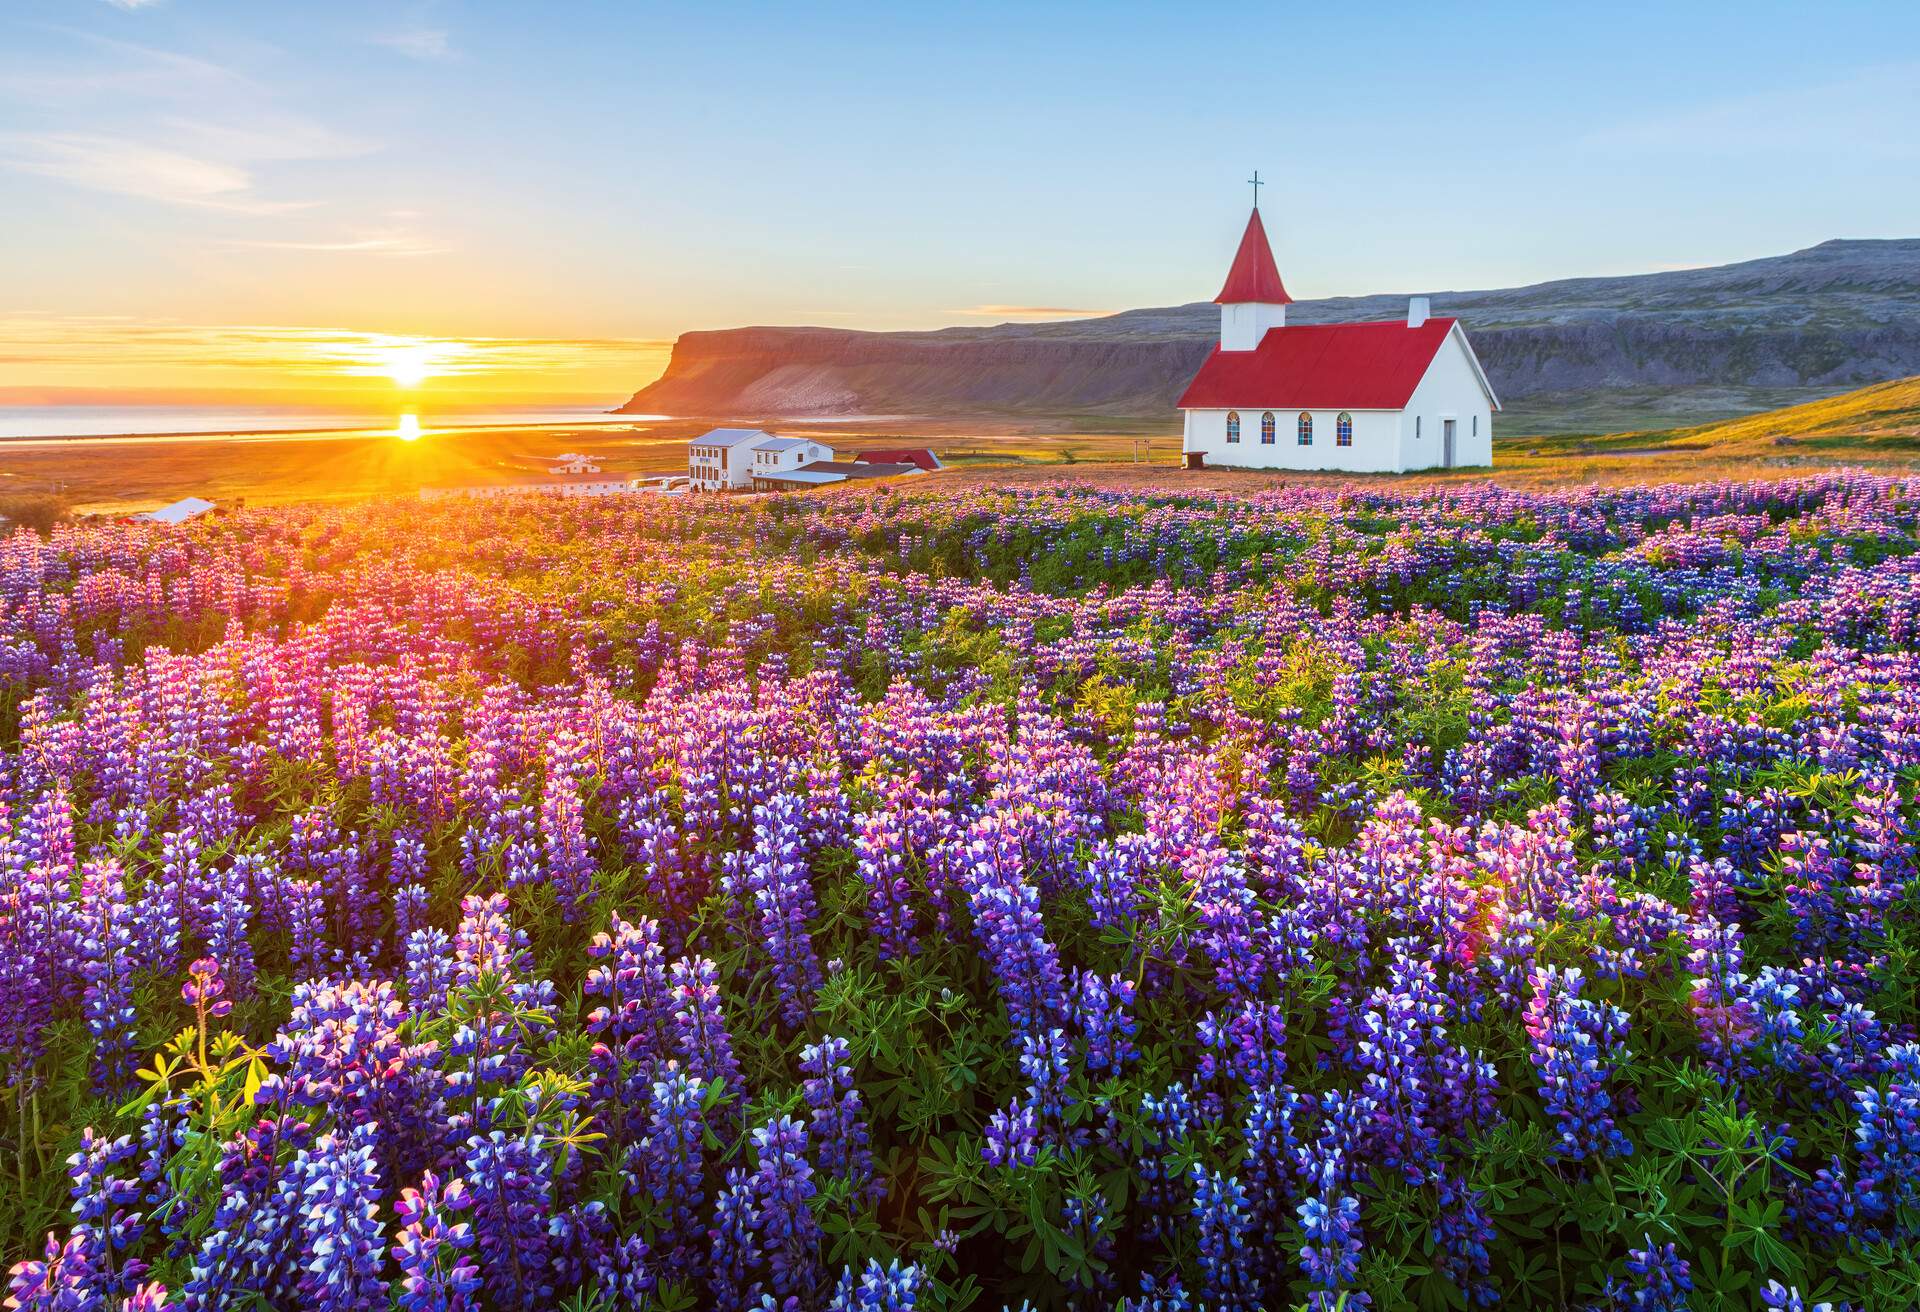 Located at Westfjord near the very popular Látrabjarg birdwatching cliffs, Breiðavík church is a quaint church situated near the beach and is very attractive in Springtime.